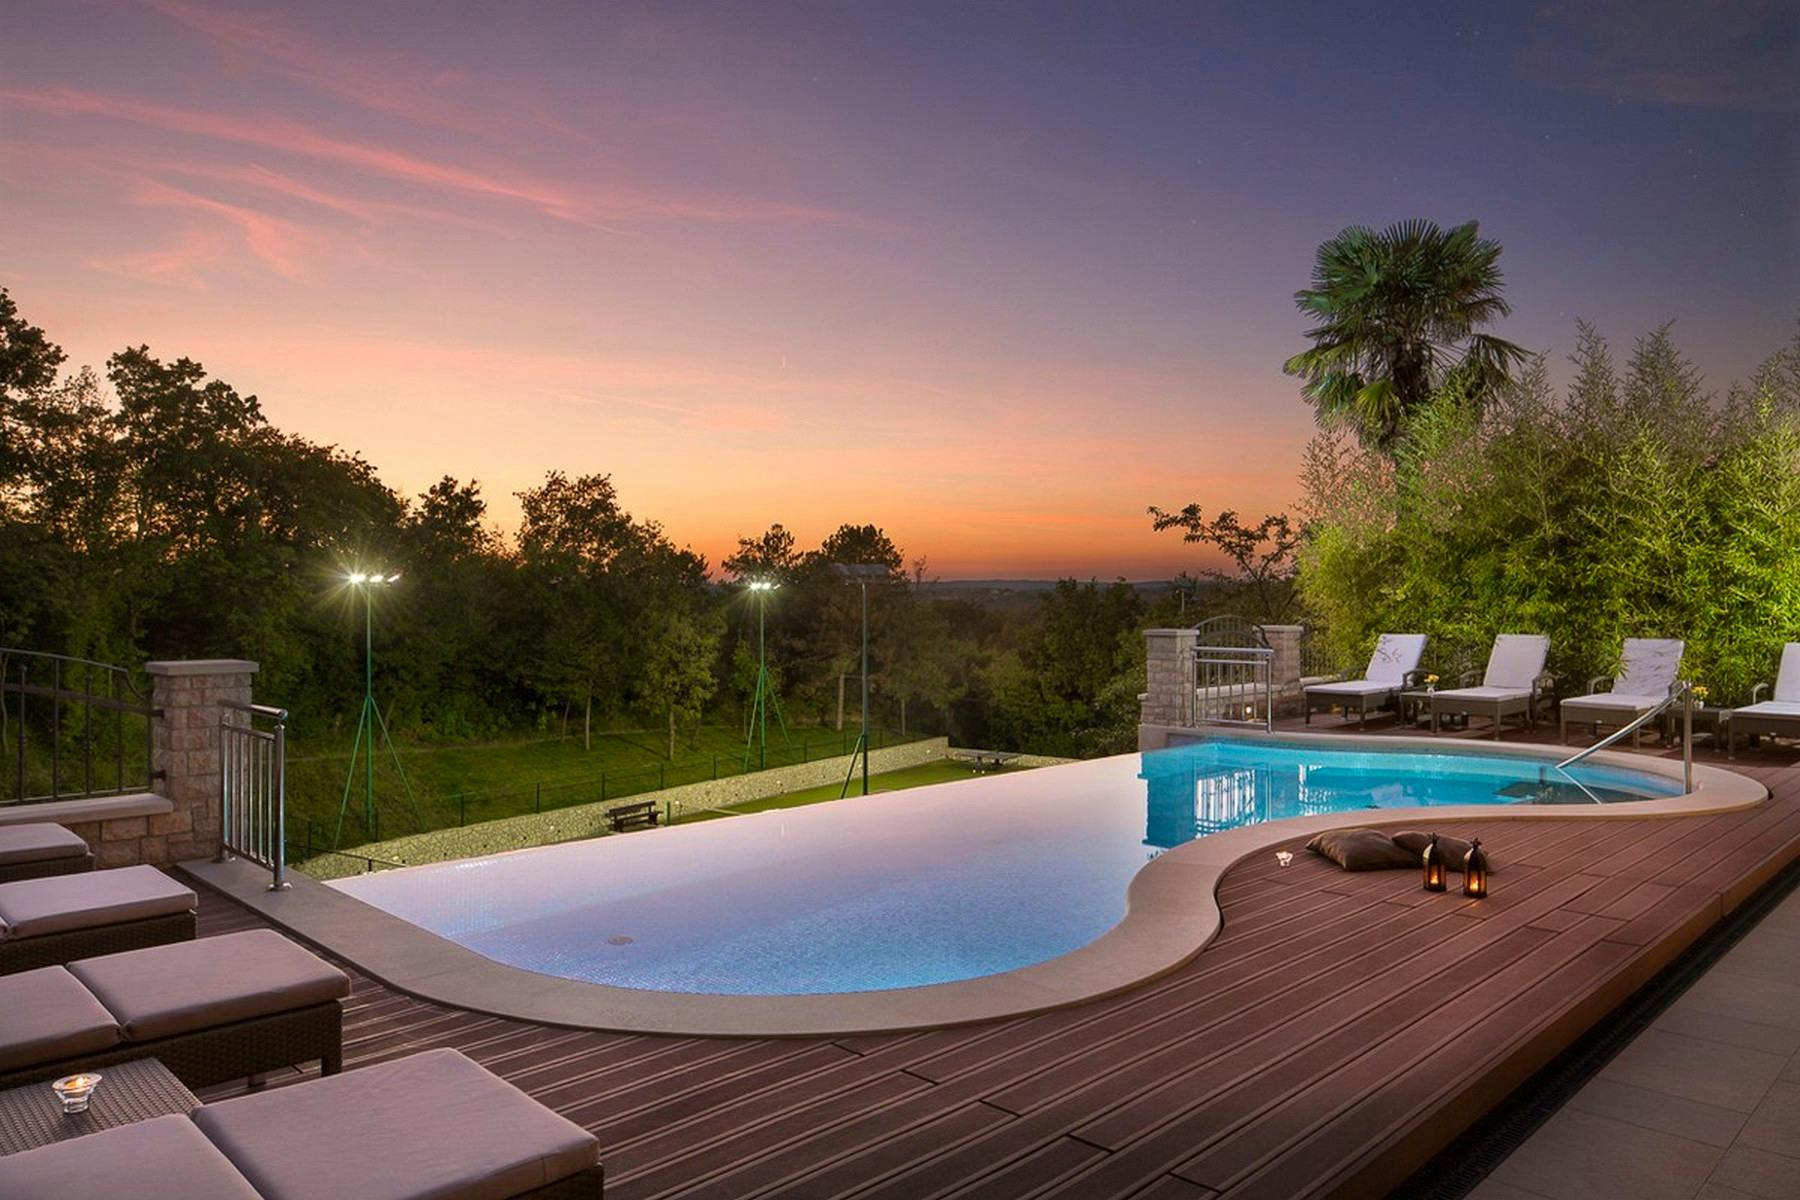 Modern pool in the sunset